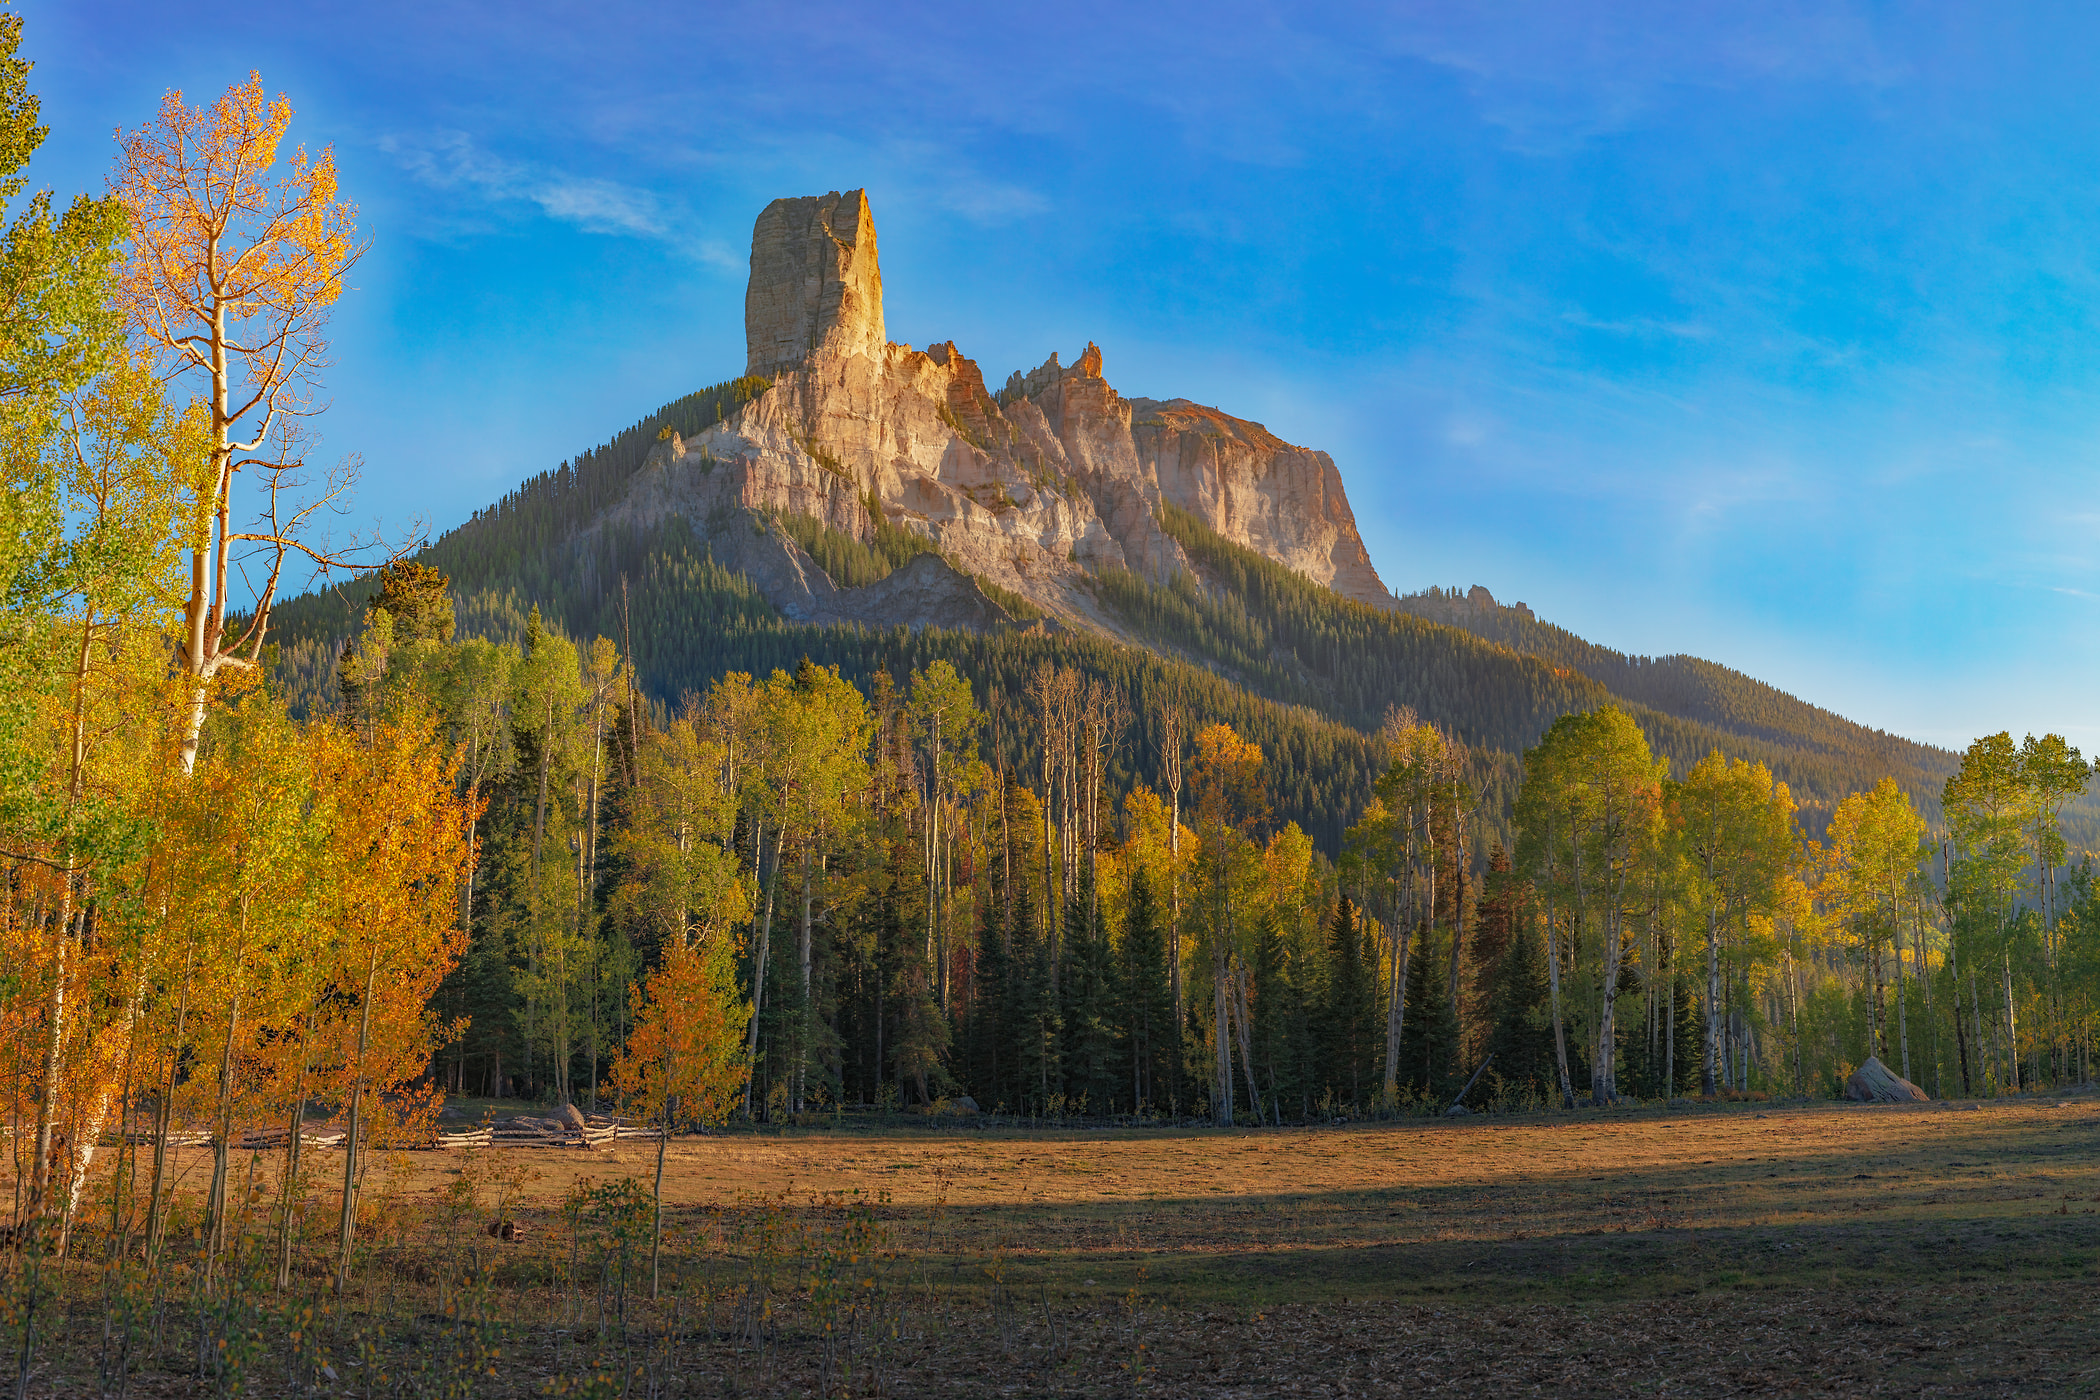 1,015 megapixels! A very high resolution, wall art photo of a mountain at sunset with autumn trees in the foreground; landscape photograph created by John Freeman in Deb's Meadow,  Cimarron Ridge, San Juan Mountains, Colorado